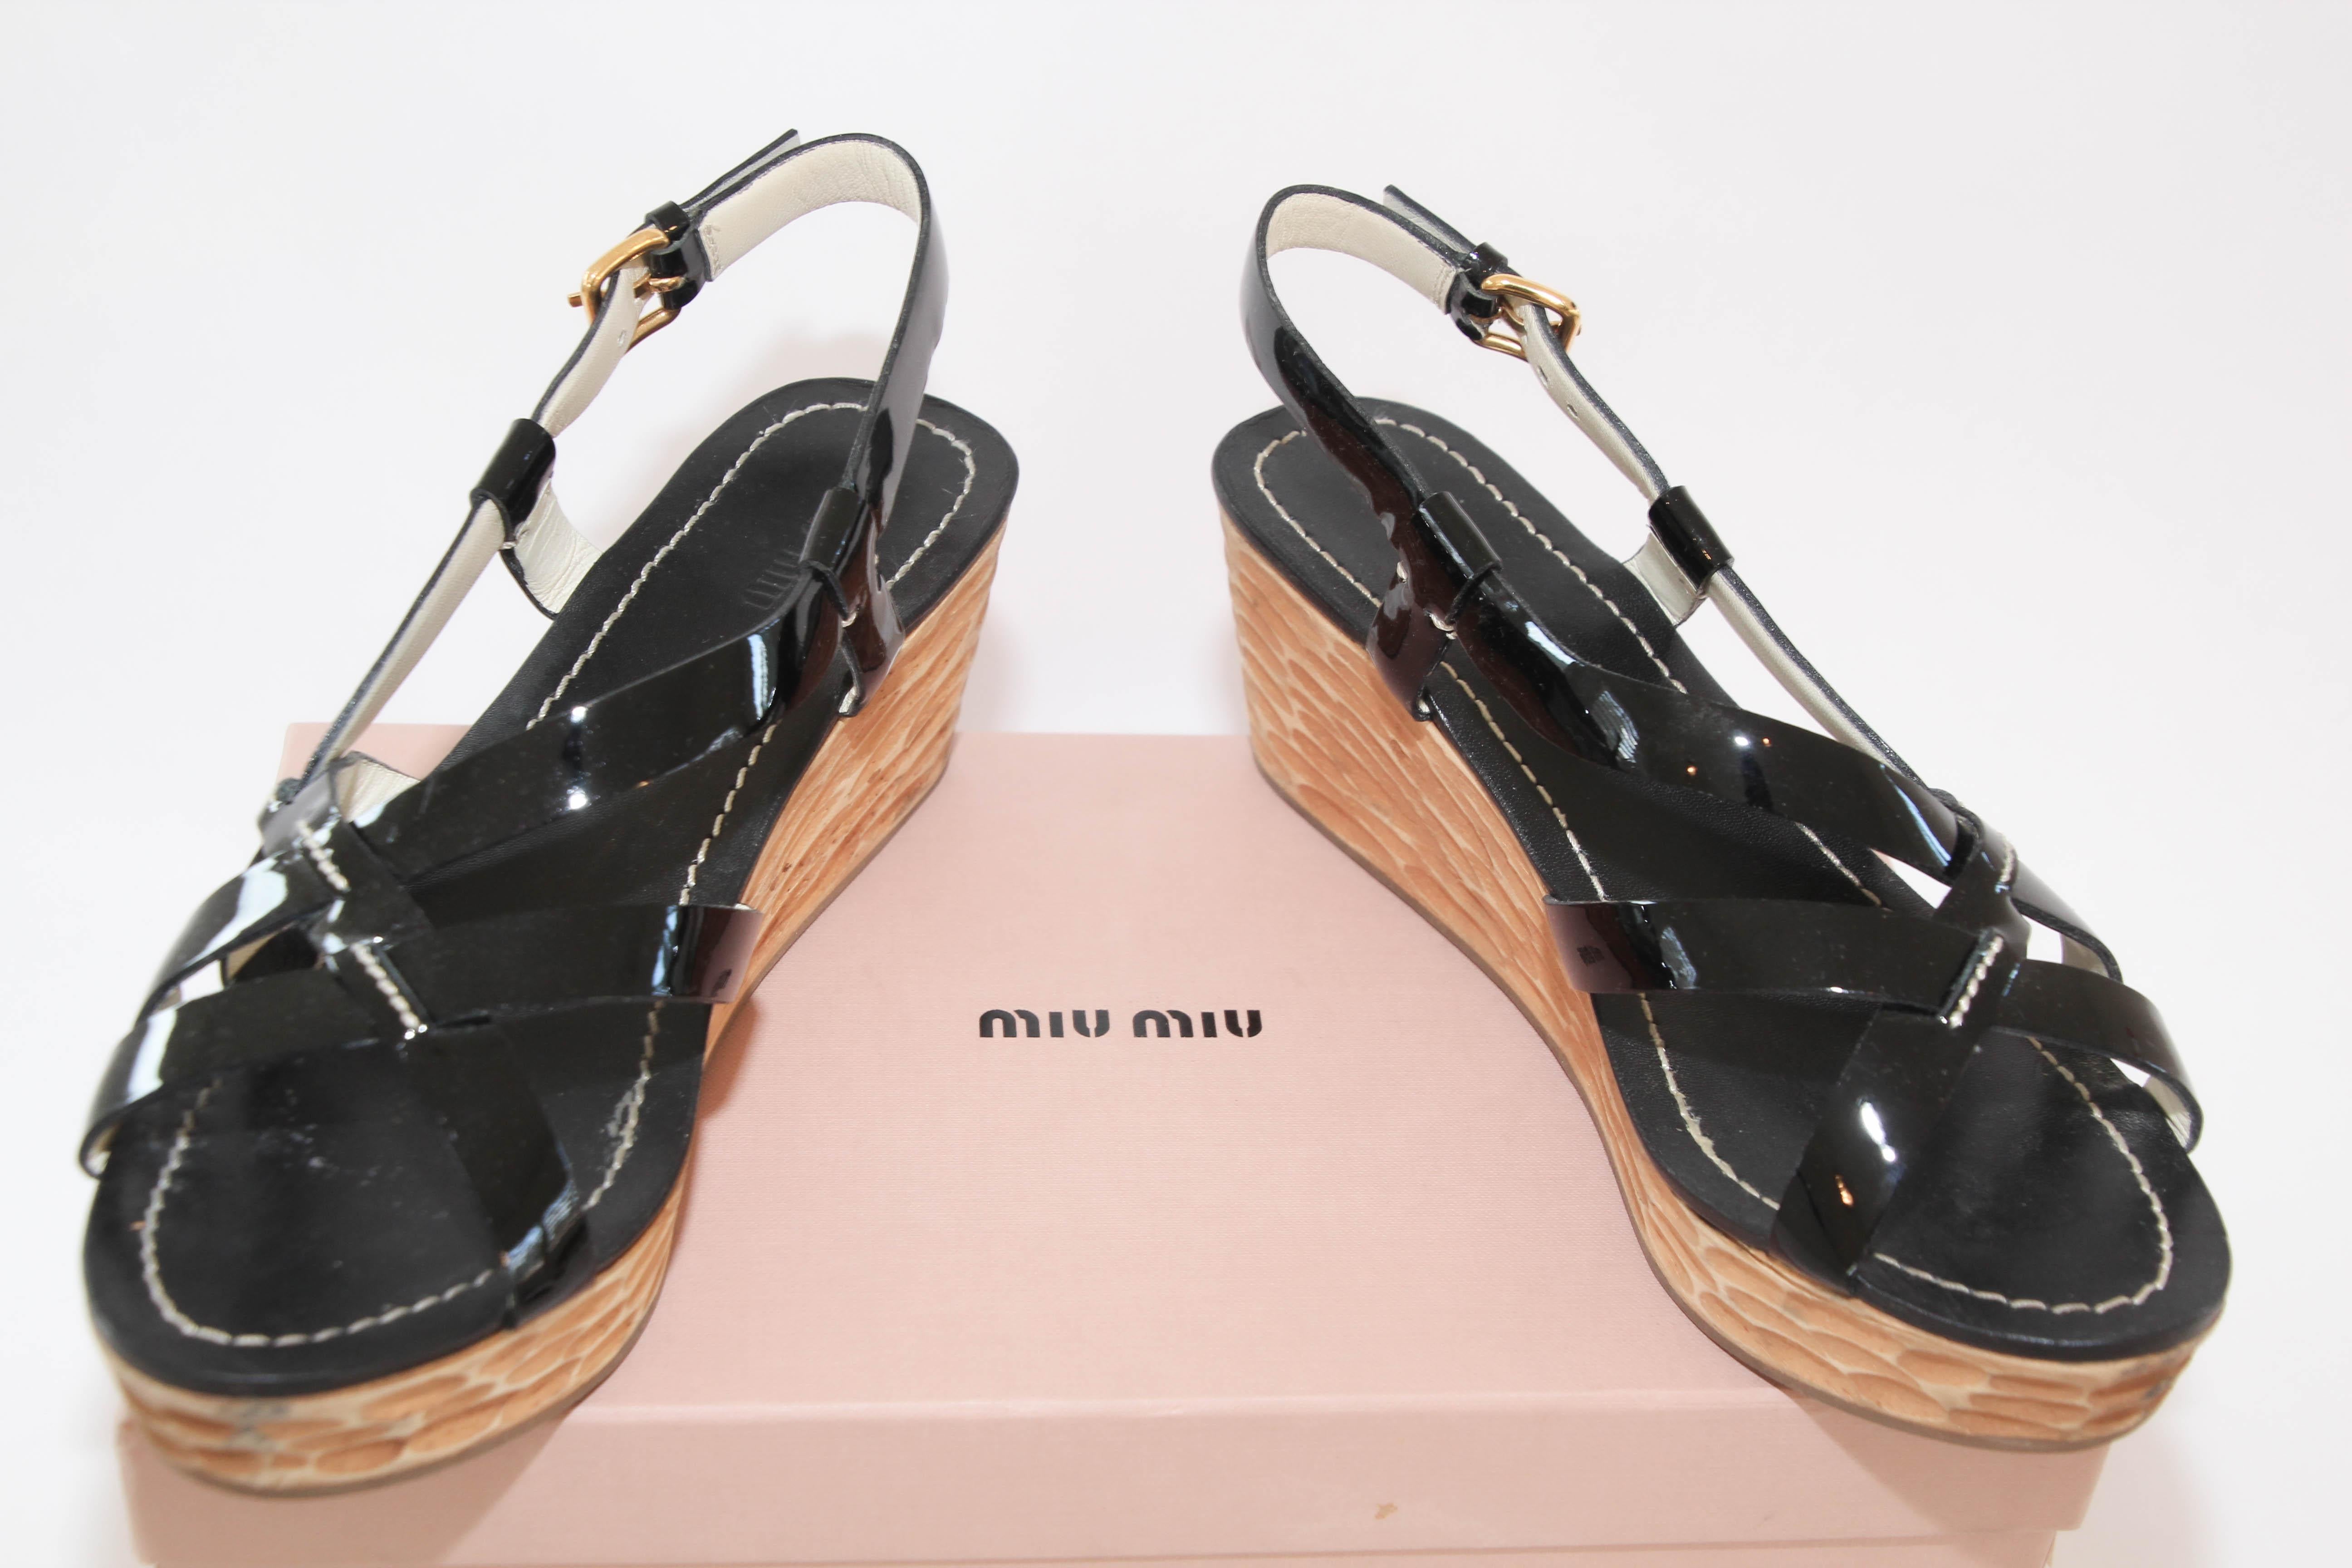 Miu Miu Black Criss Cross Patent Leather Sling Back Wooden Wedges Sandals Size 38.
MIU MIU black patent leather sandals, slingback, wedge heels with platform, crossover stripes with brass buckle closure at ankles.
Flaunt style at its best with these